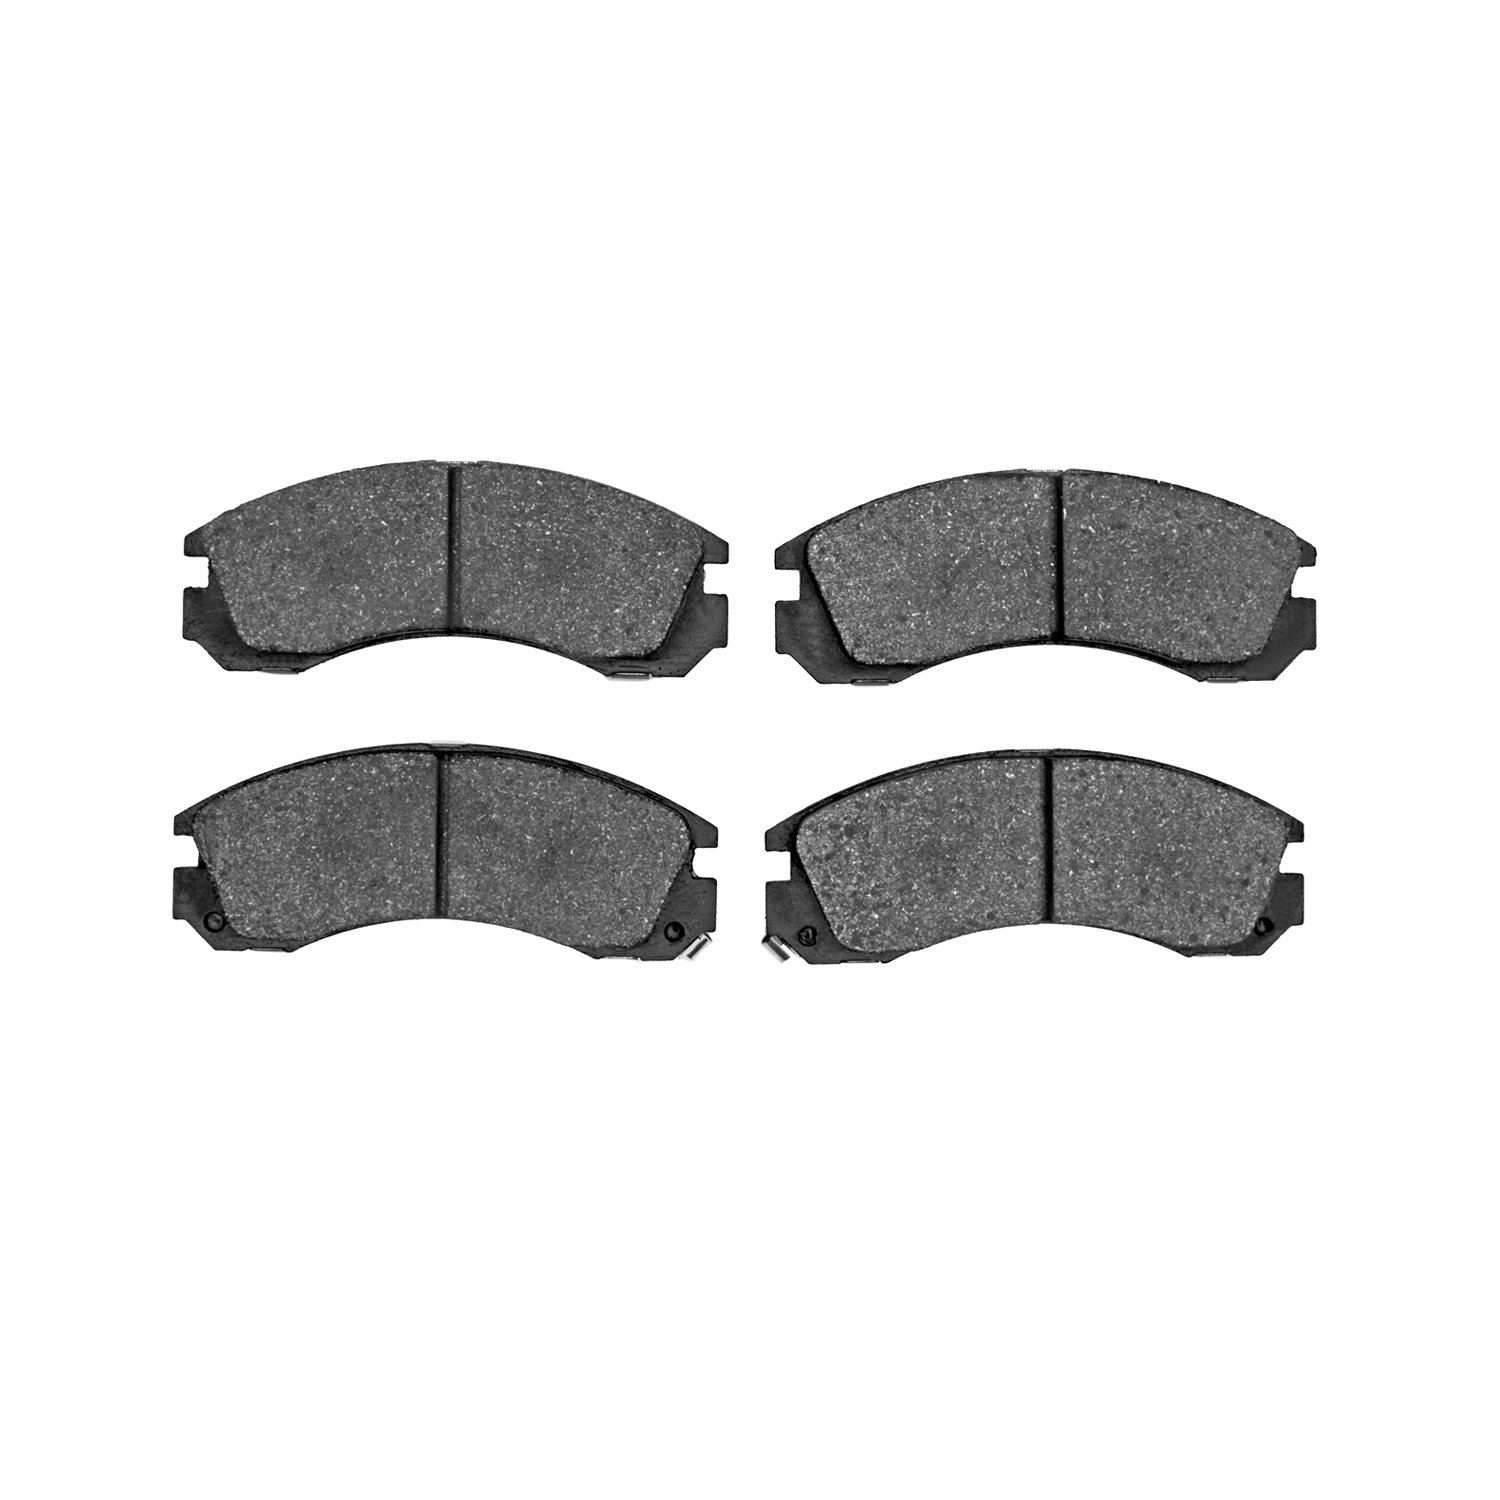 1310-0530-00 3000-Series Ceramic Brake Pads, Fits Select Multiple Makes/Models, Position: Front